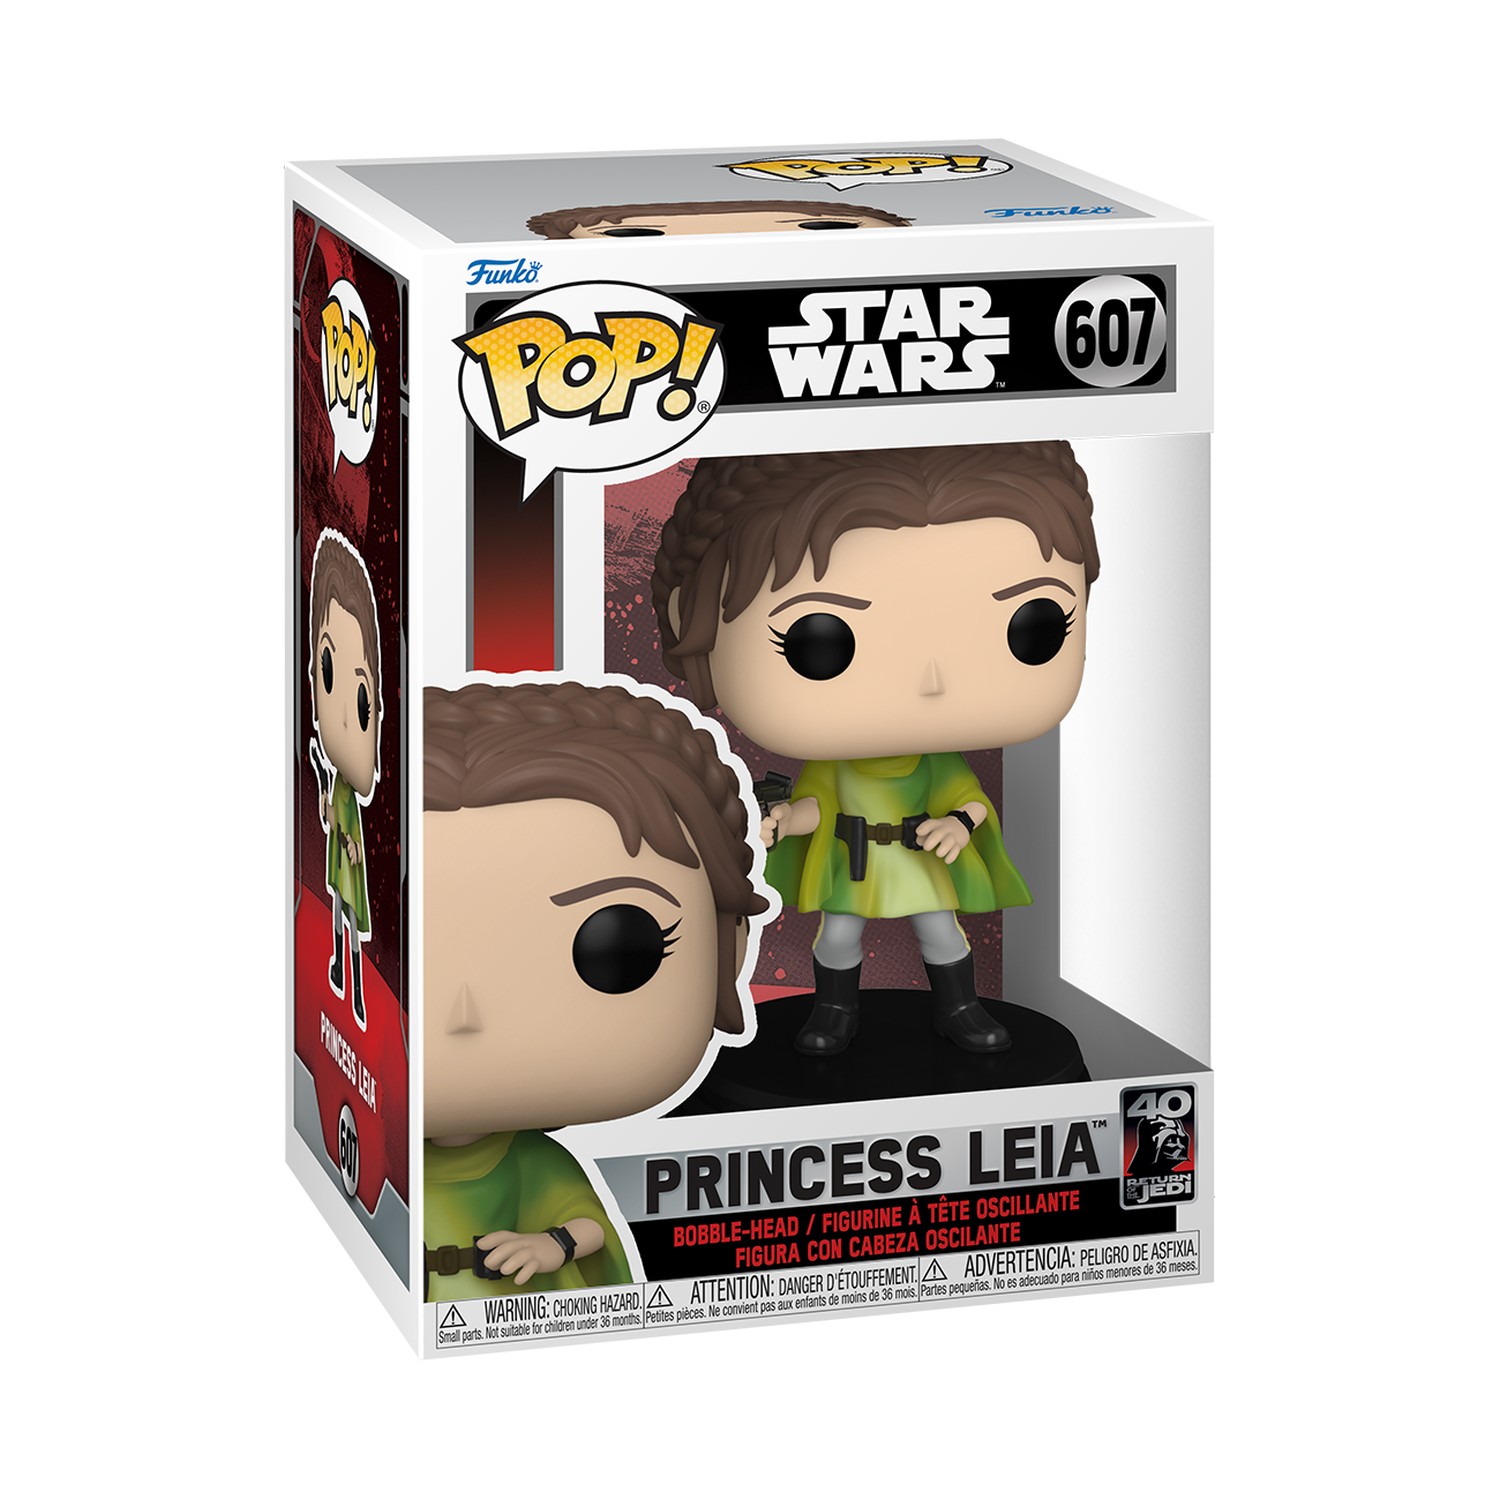 Celebrate the 40th Anniversary of Return of the Jedi with the most stellar fandom of all! Pop! Princess Leia is ready to lead the Rebels on the Battle of Endor!